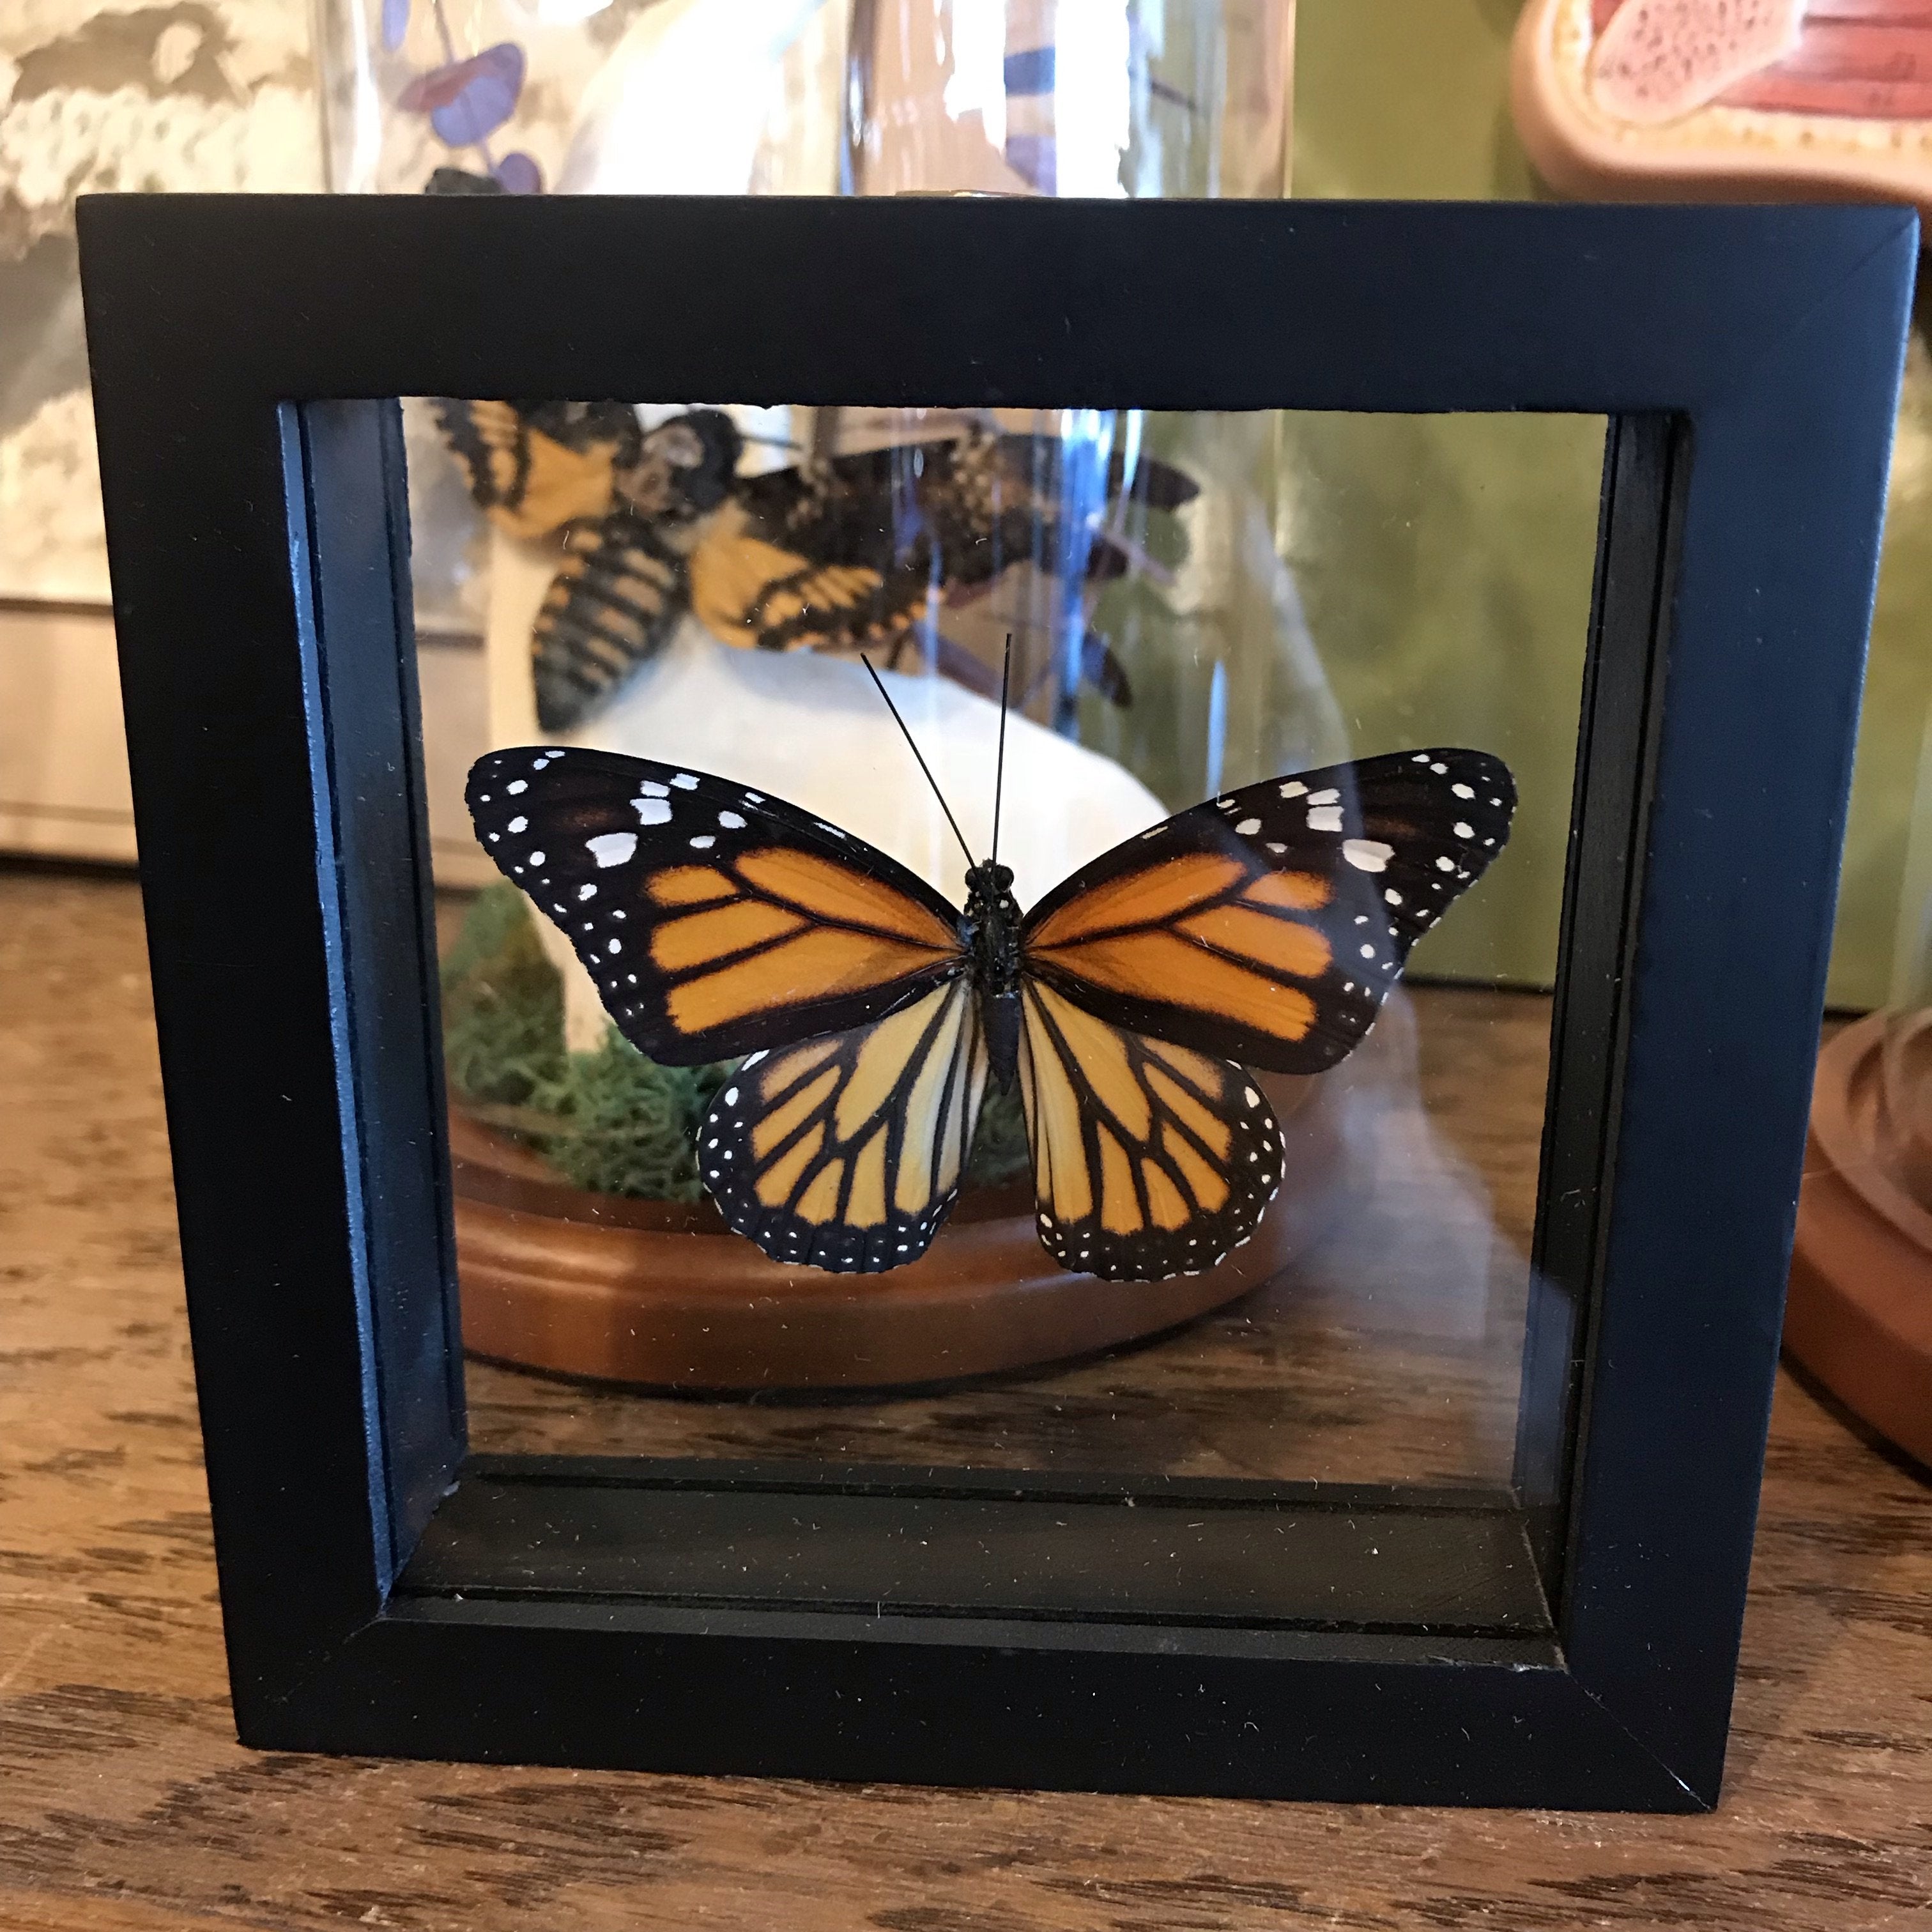 Real Framed North American Monarch Danaus Plexippus Butterfly Insect Taxidermy